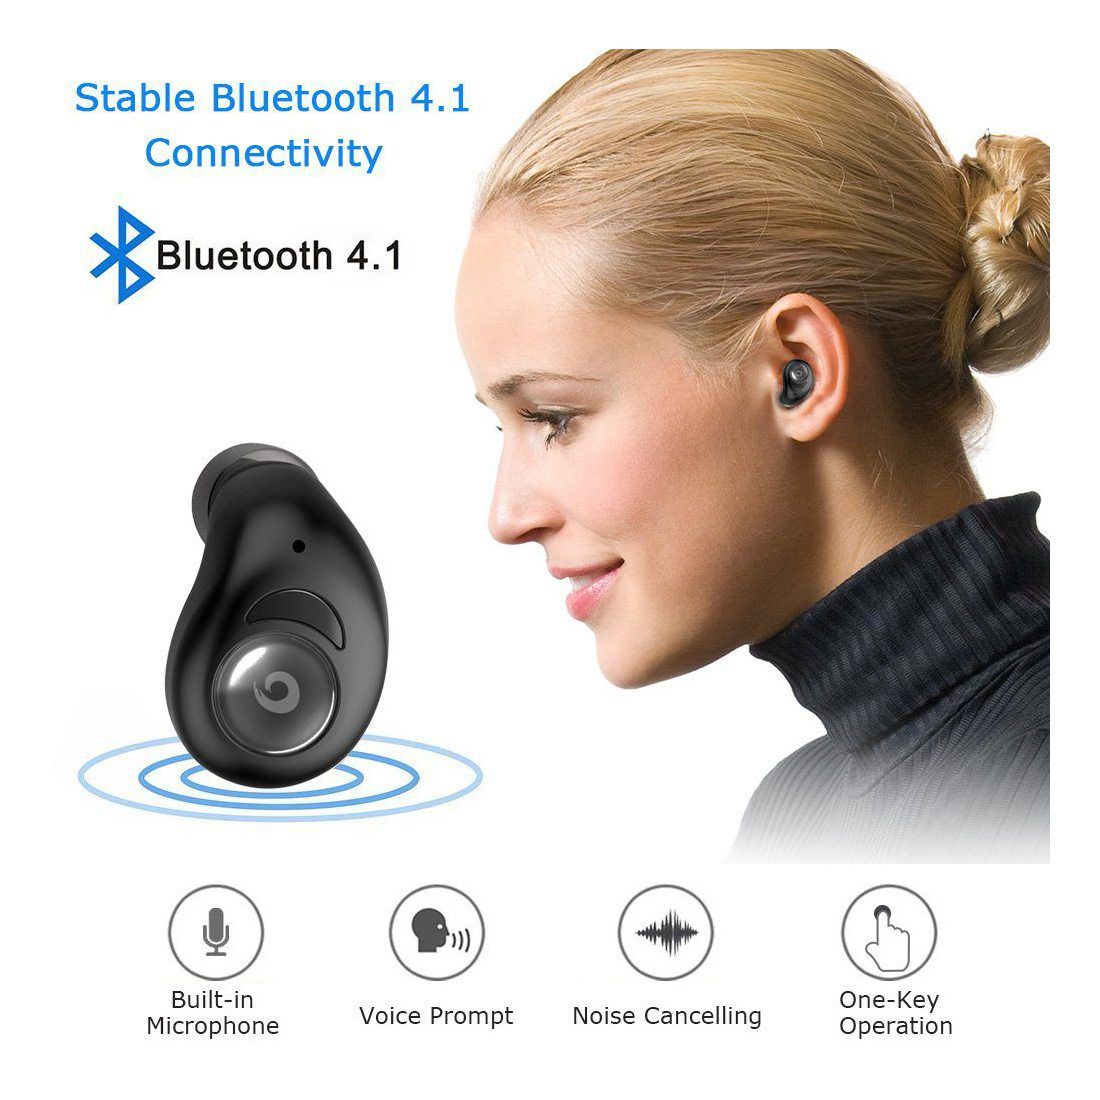 Bluetooth connection. True Wireless stereo Gaming Earbuds.